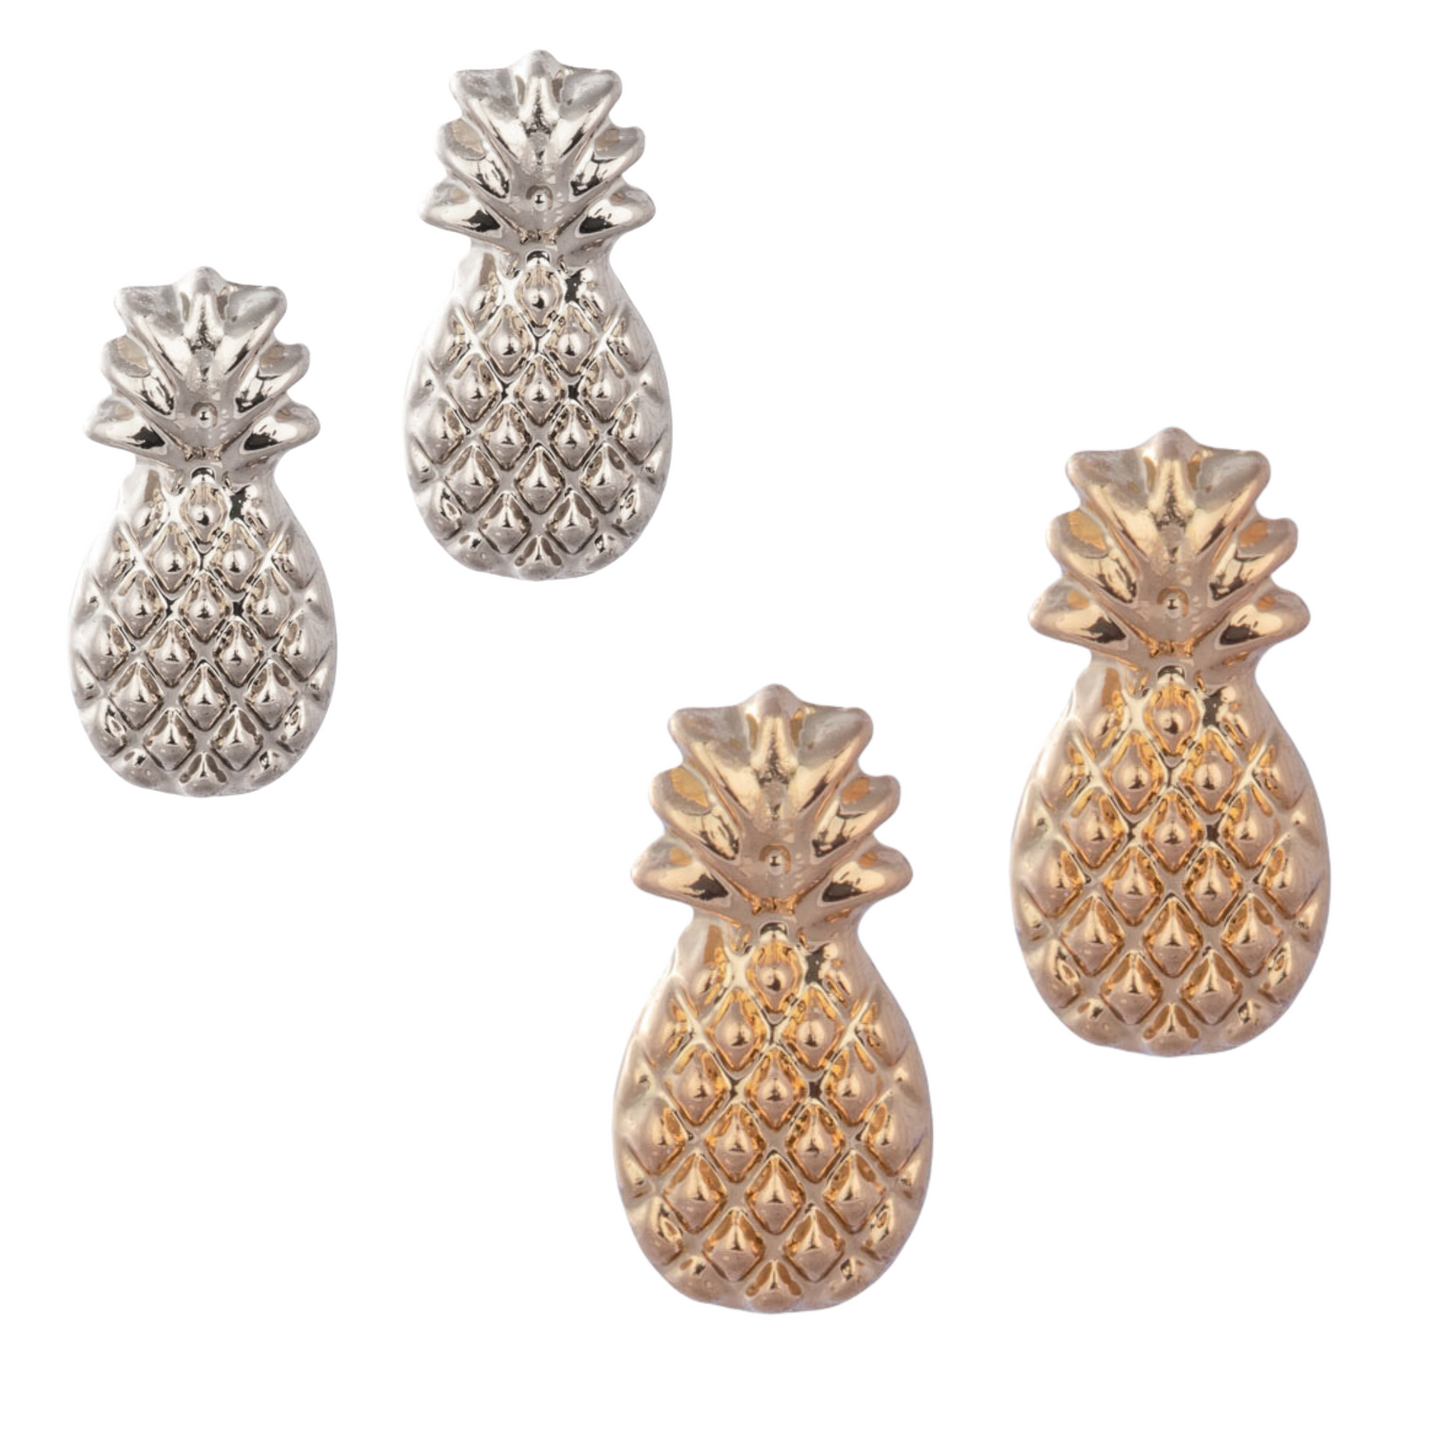 Pineapple stud earrings. Available in silver and gold